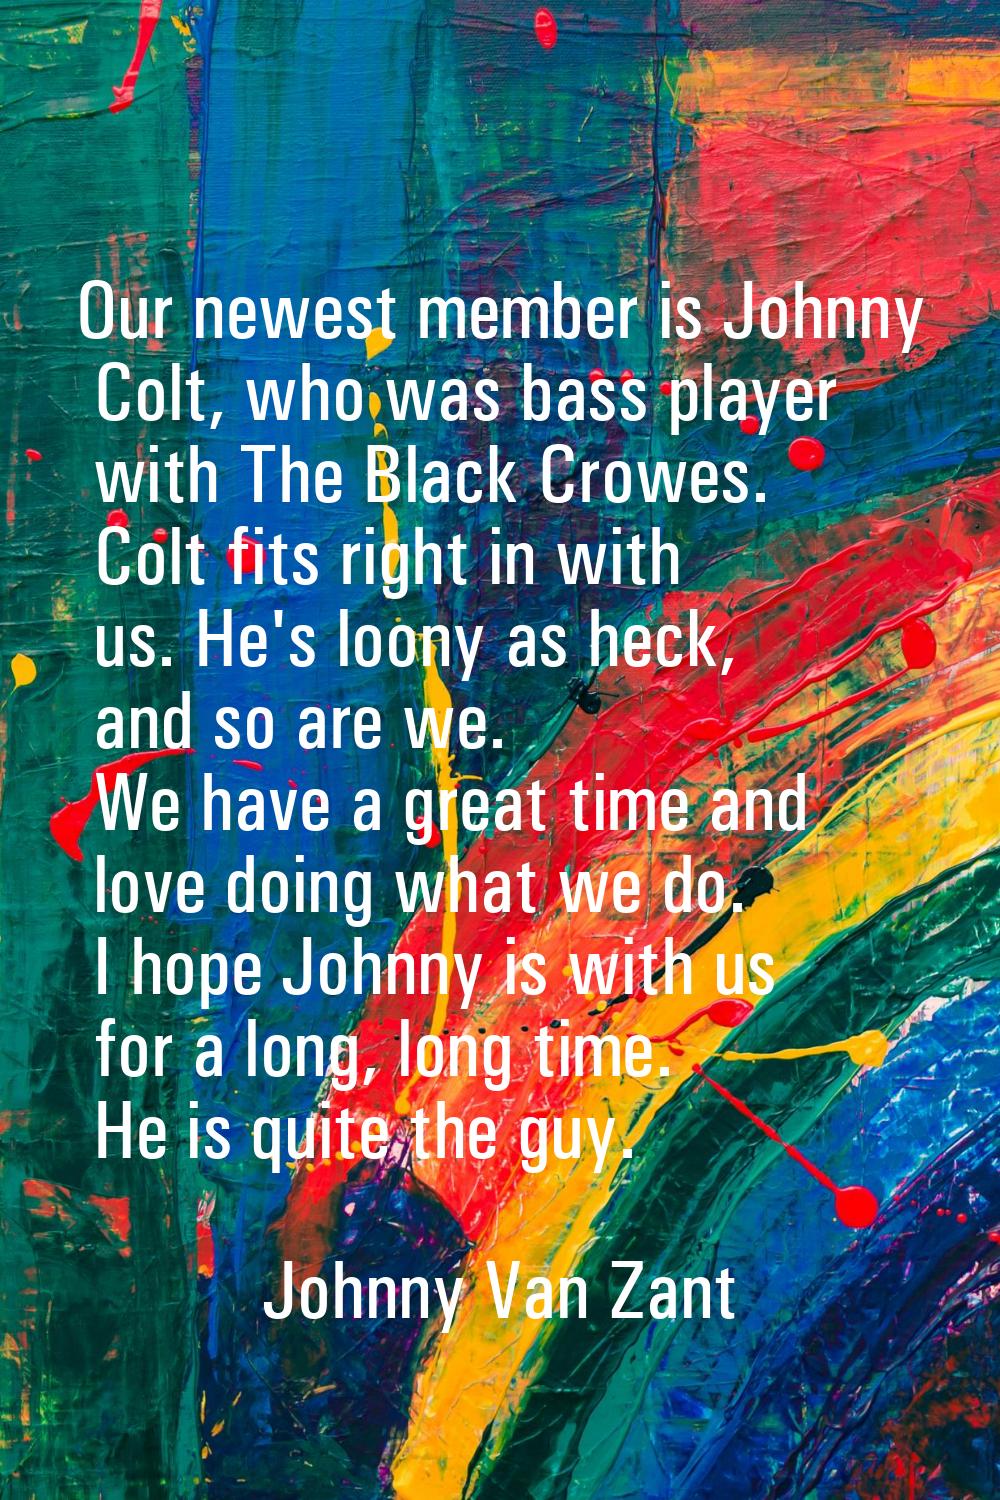 Our newest member is Johnny Colt, who was bass player with The Black Crowes. Colt fits right in wit